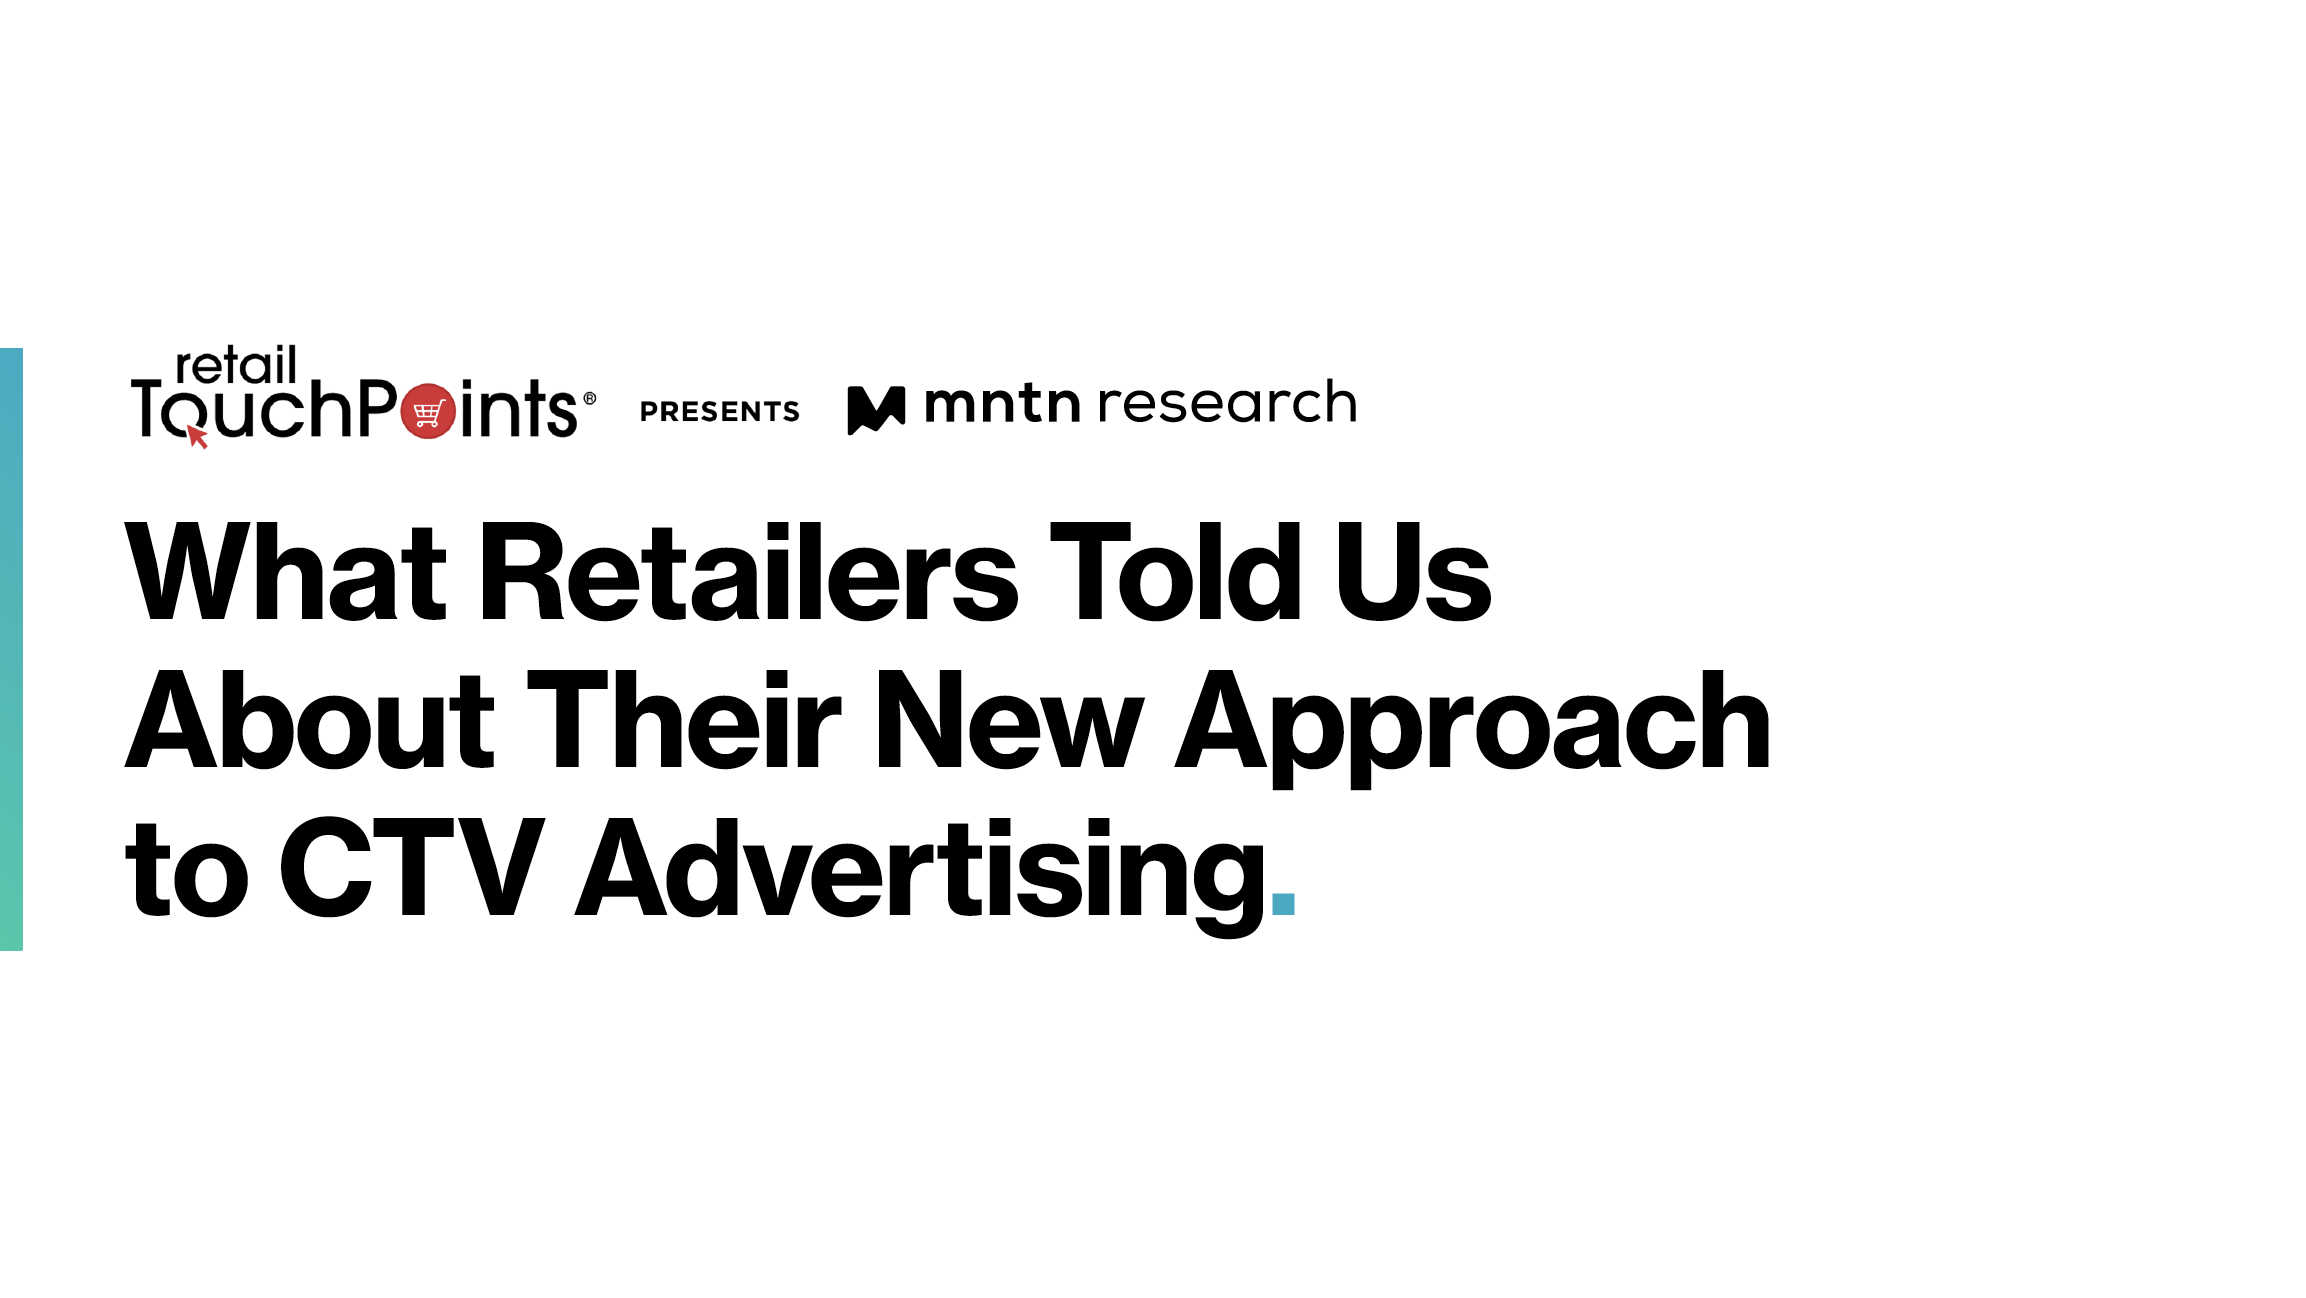 What Retailers Told Us About Their New Approach to CTV Advertising